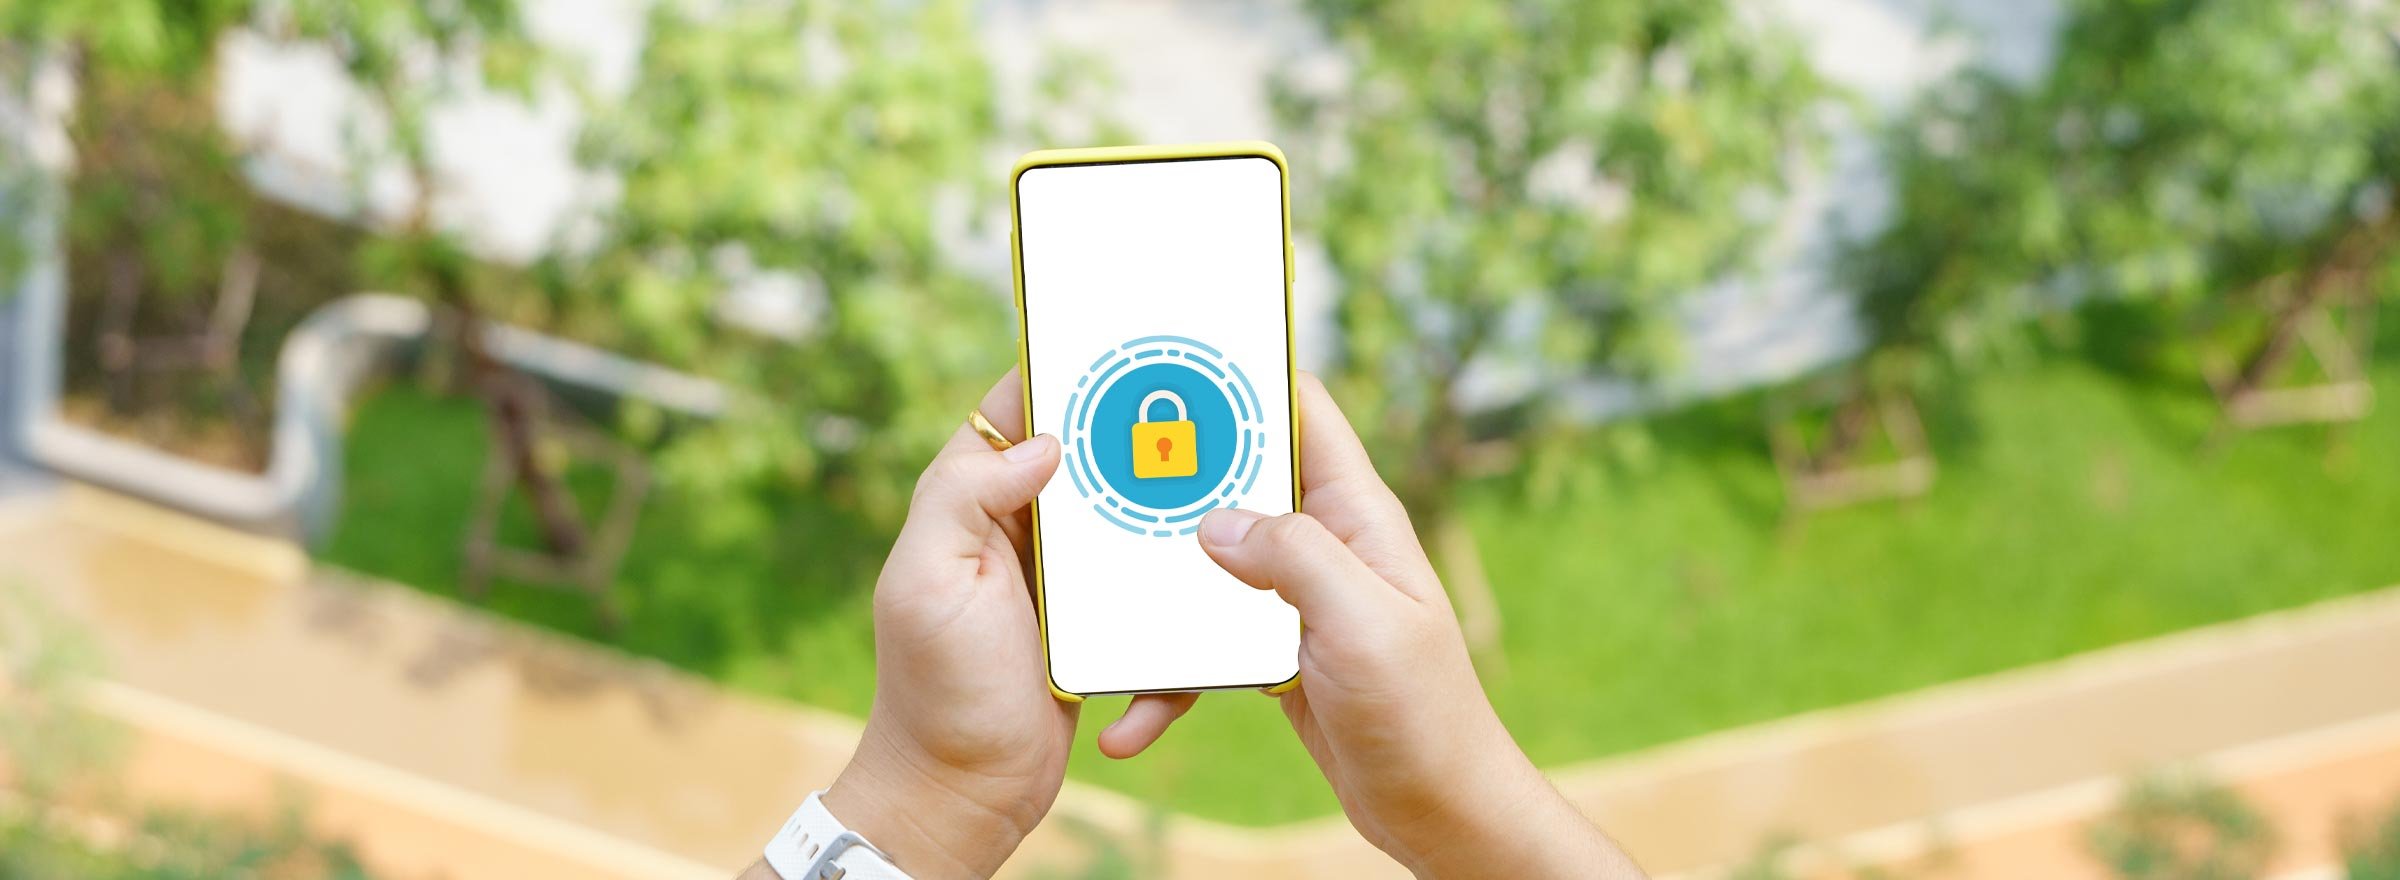 hands holding a smartphone showing a padlock on its screen